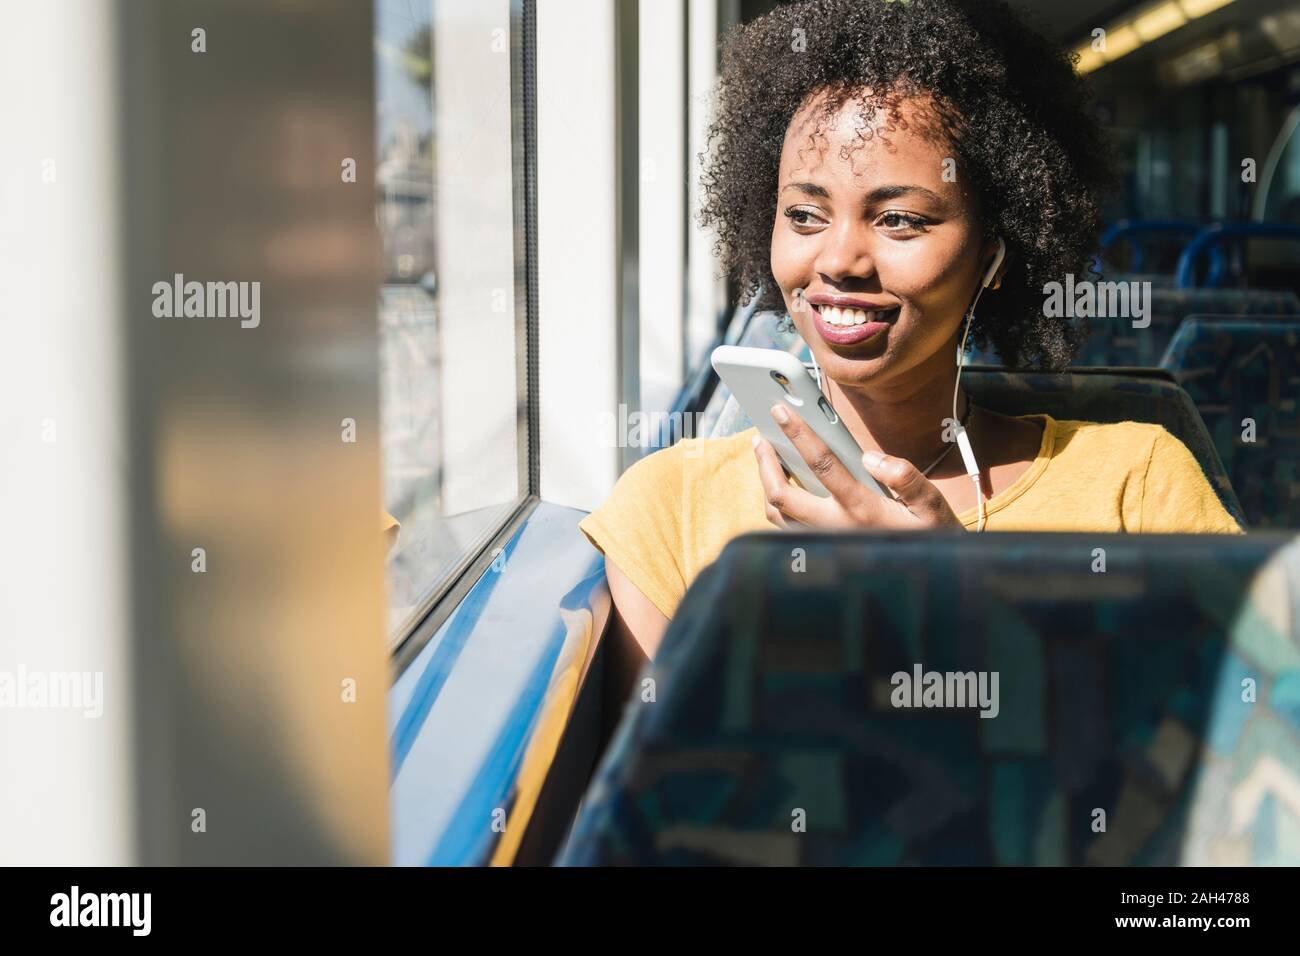 Smiling young woman with earphones and smartphone on a train Stock Photo